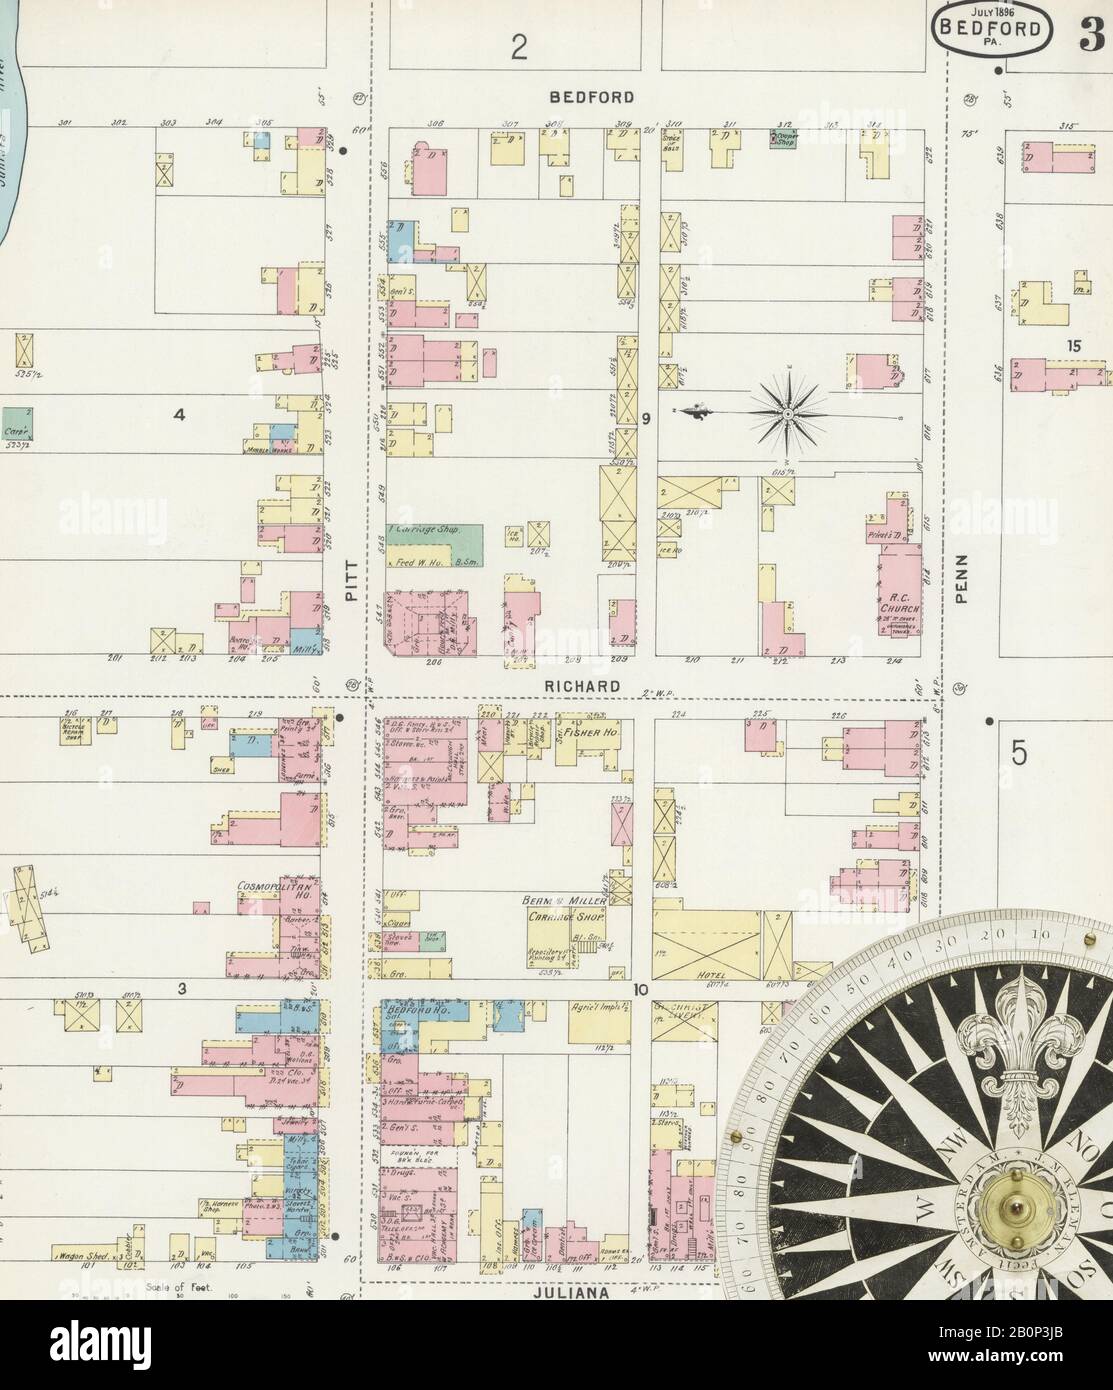 Image 3 of Sanborn Fire Insurance Map from Bedford, Bedford County, Pennsylvania. Jul 1896. 5 Sheet(s), America, street map with a Nineteenth Century compass Stock Photo